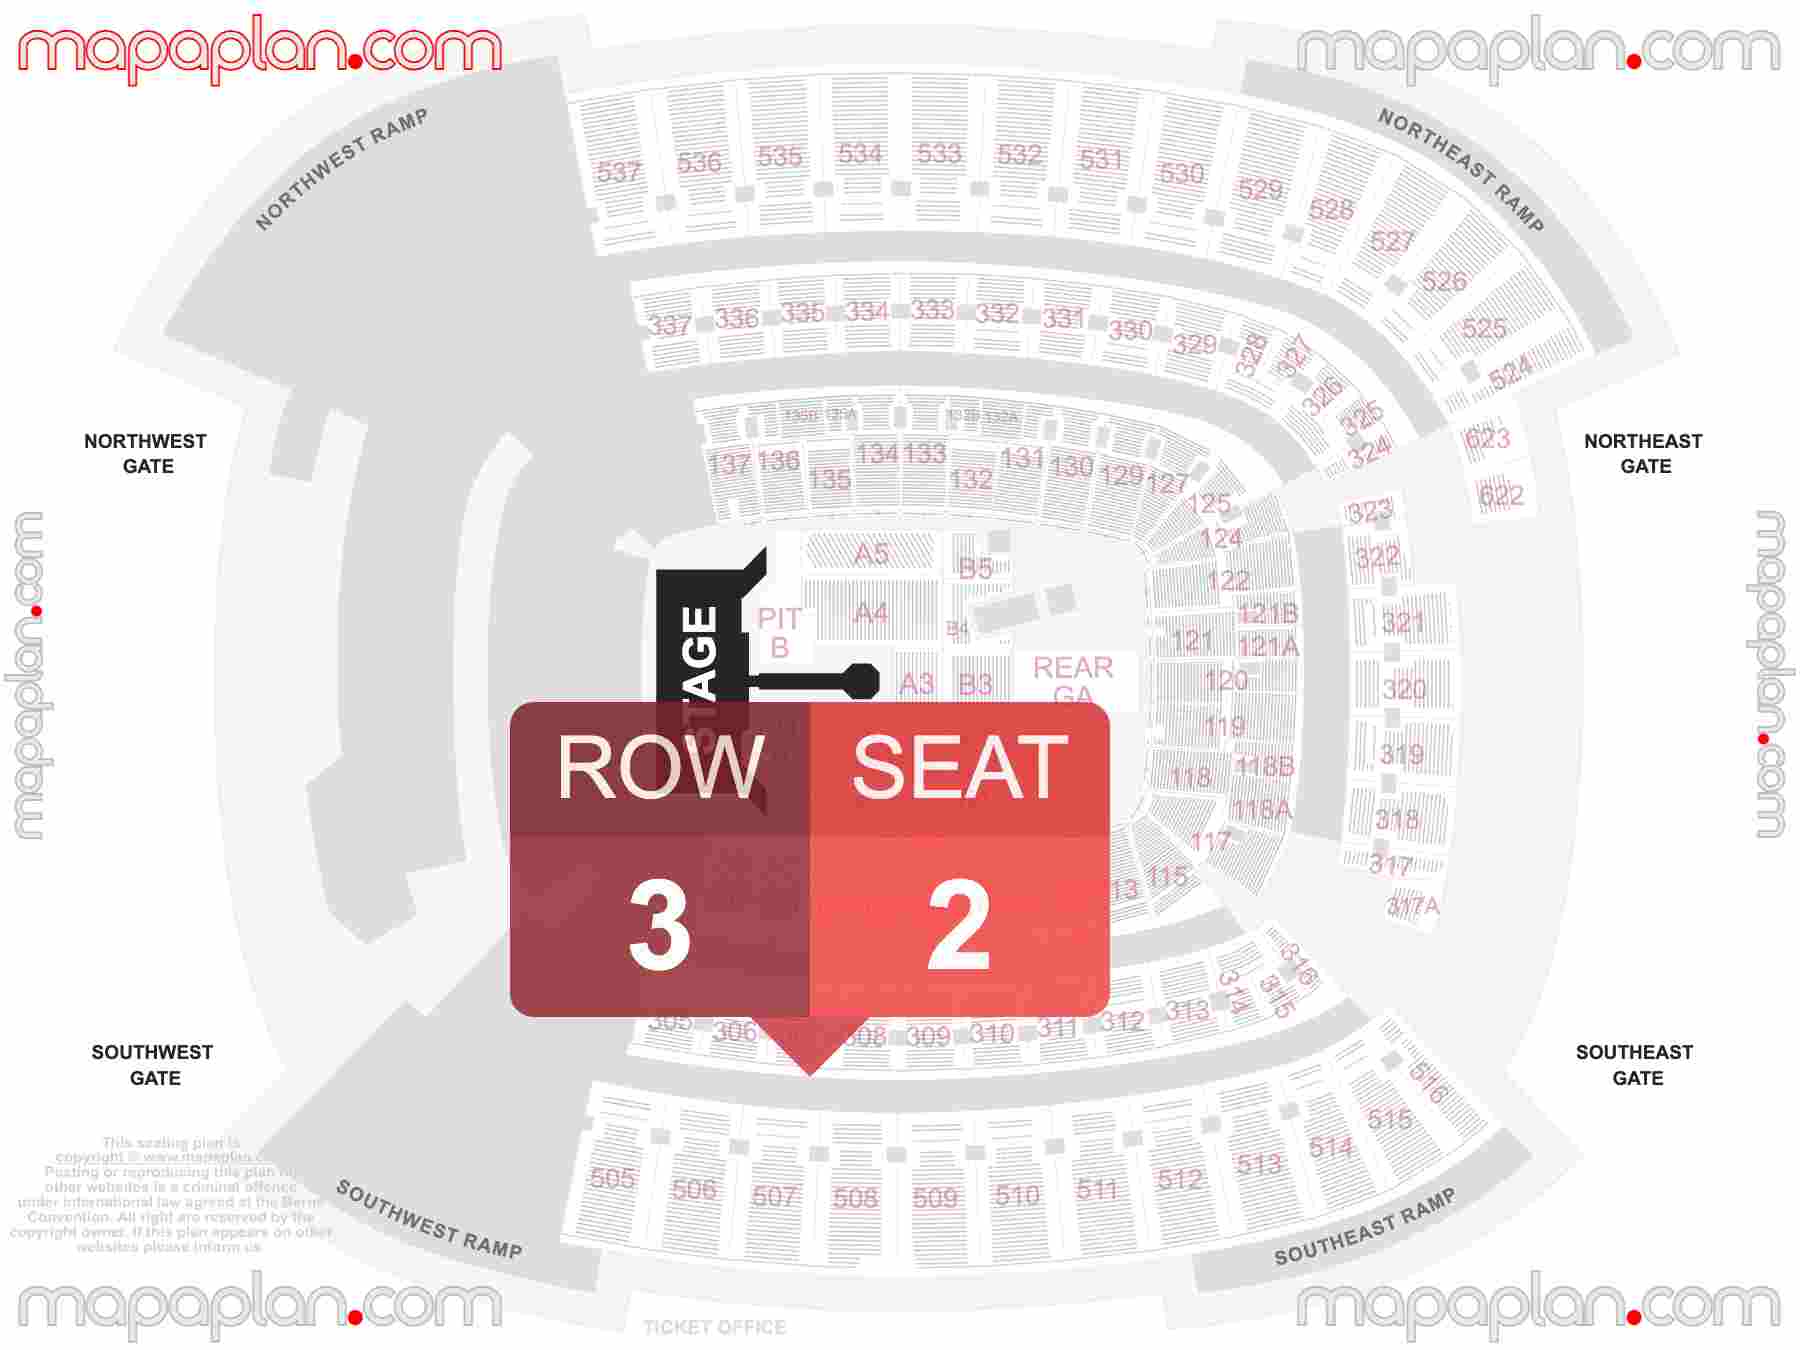 Cleveland Browns Stadium seating chart Concert with extended catwalk runway B-stage & PIT floor standing inside capacity view arrangement plan - Interactive virtual 3d best seats & rows detailed stadium image configuration layout